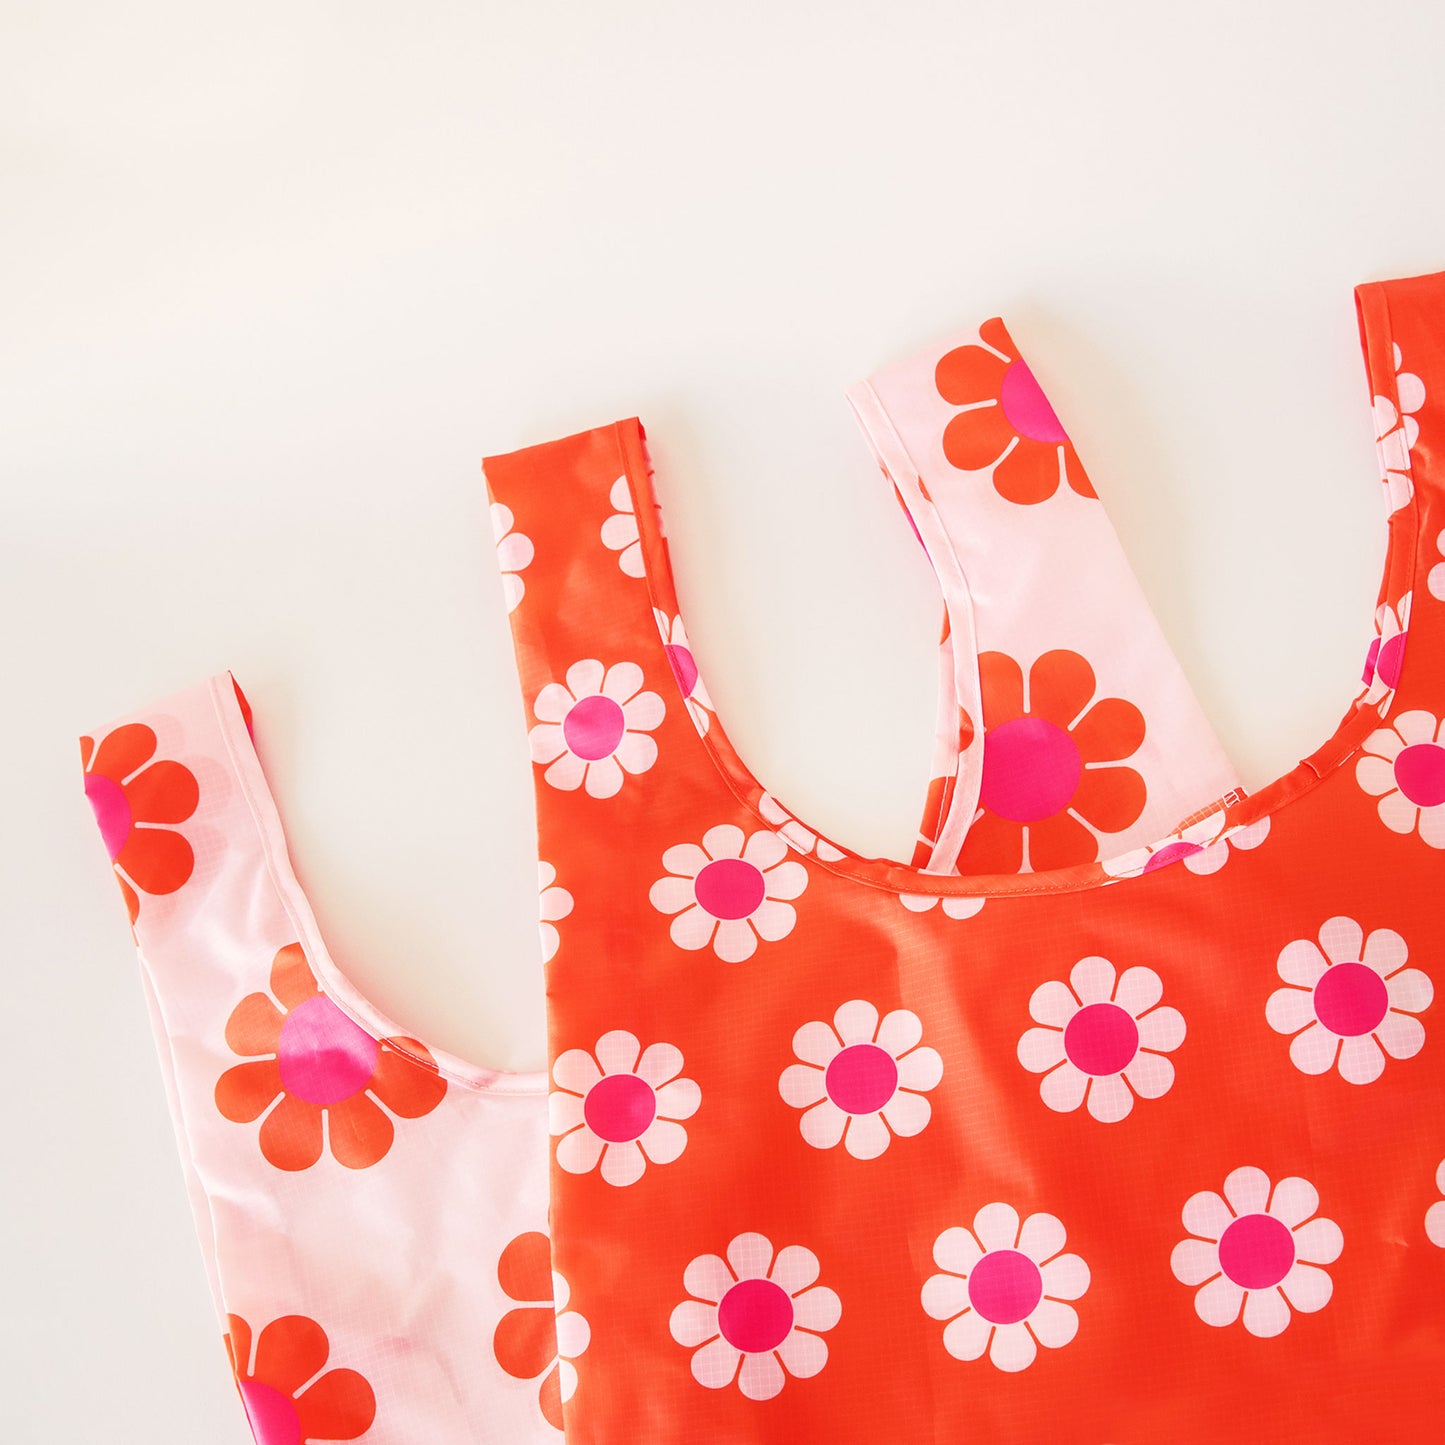 Two nylon bags layers on top of each other. Both bags have a similar print of daisy flowers. The bag layered bellow is peach with orange and pink flowers and the bag above is red-orange with pink and peach flowers 